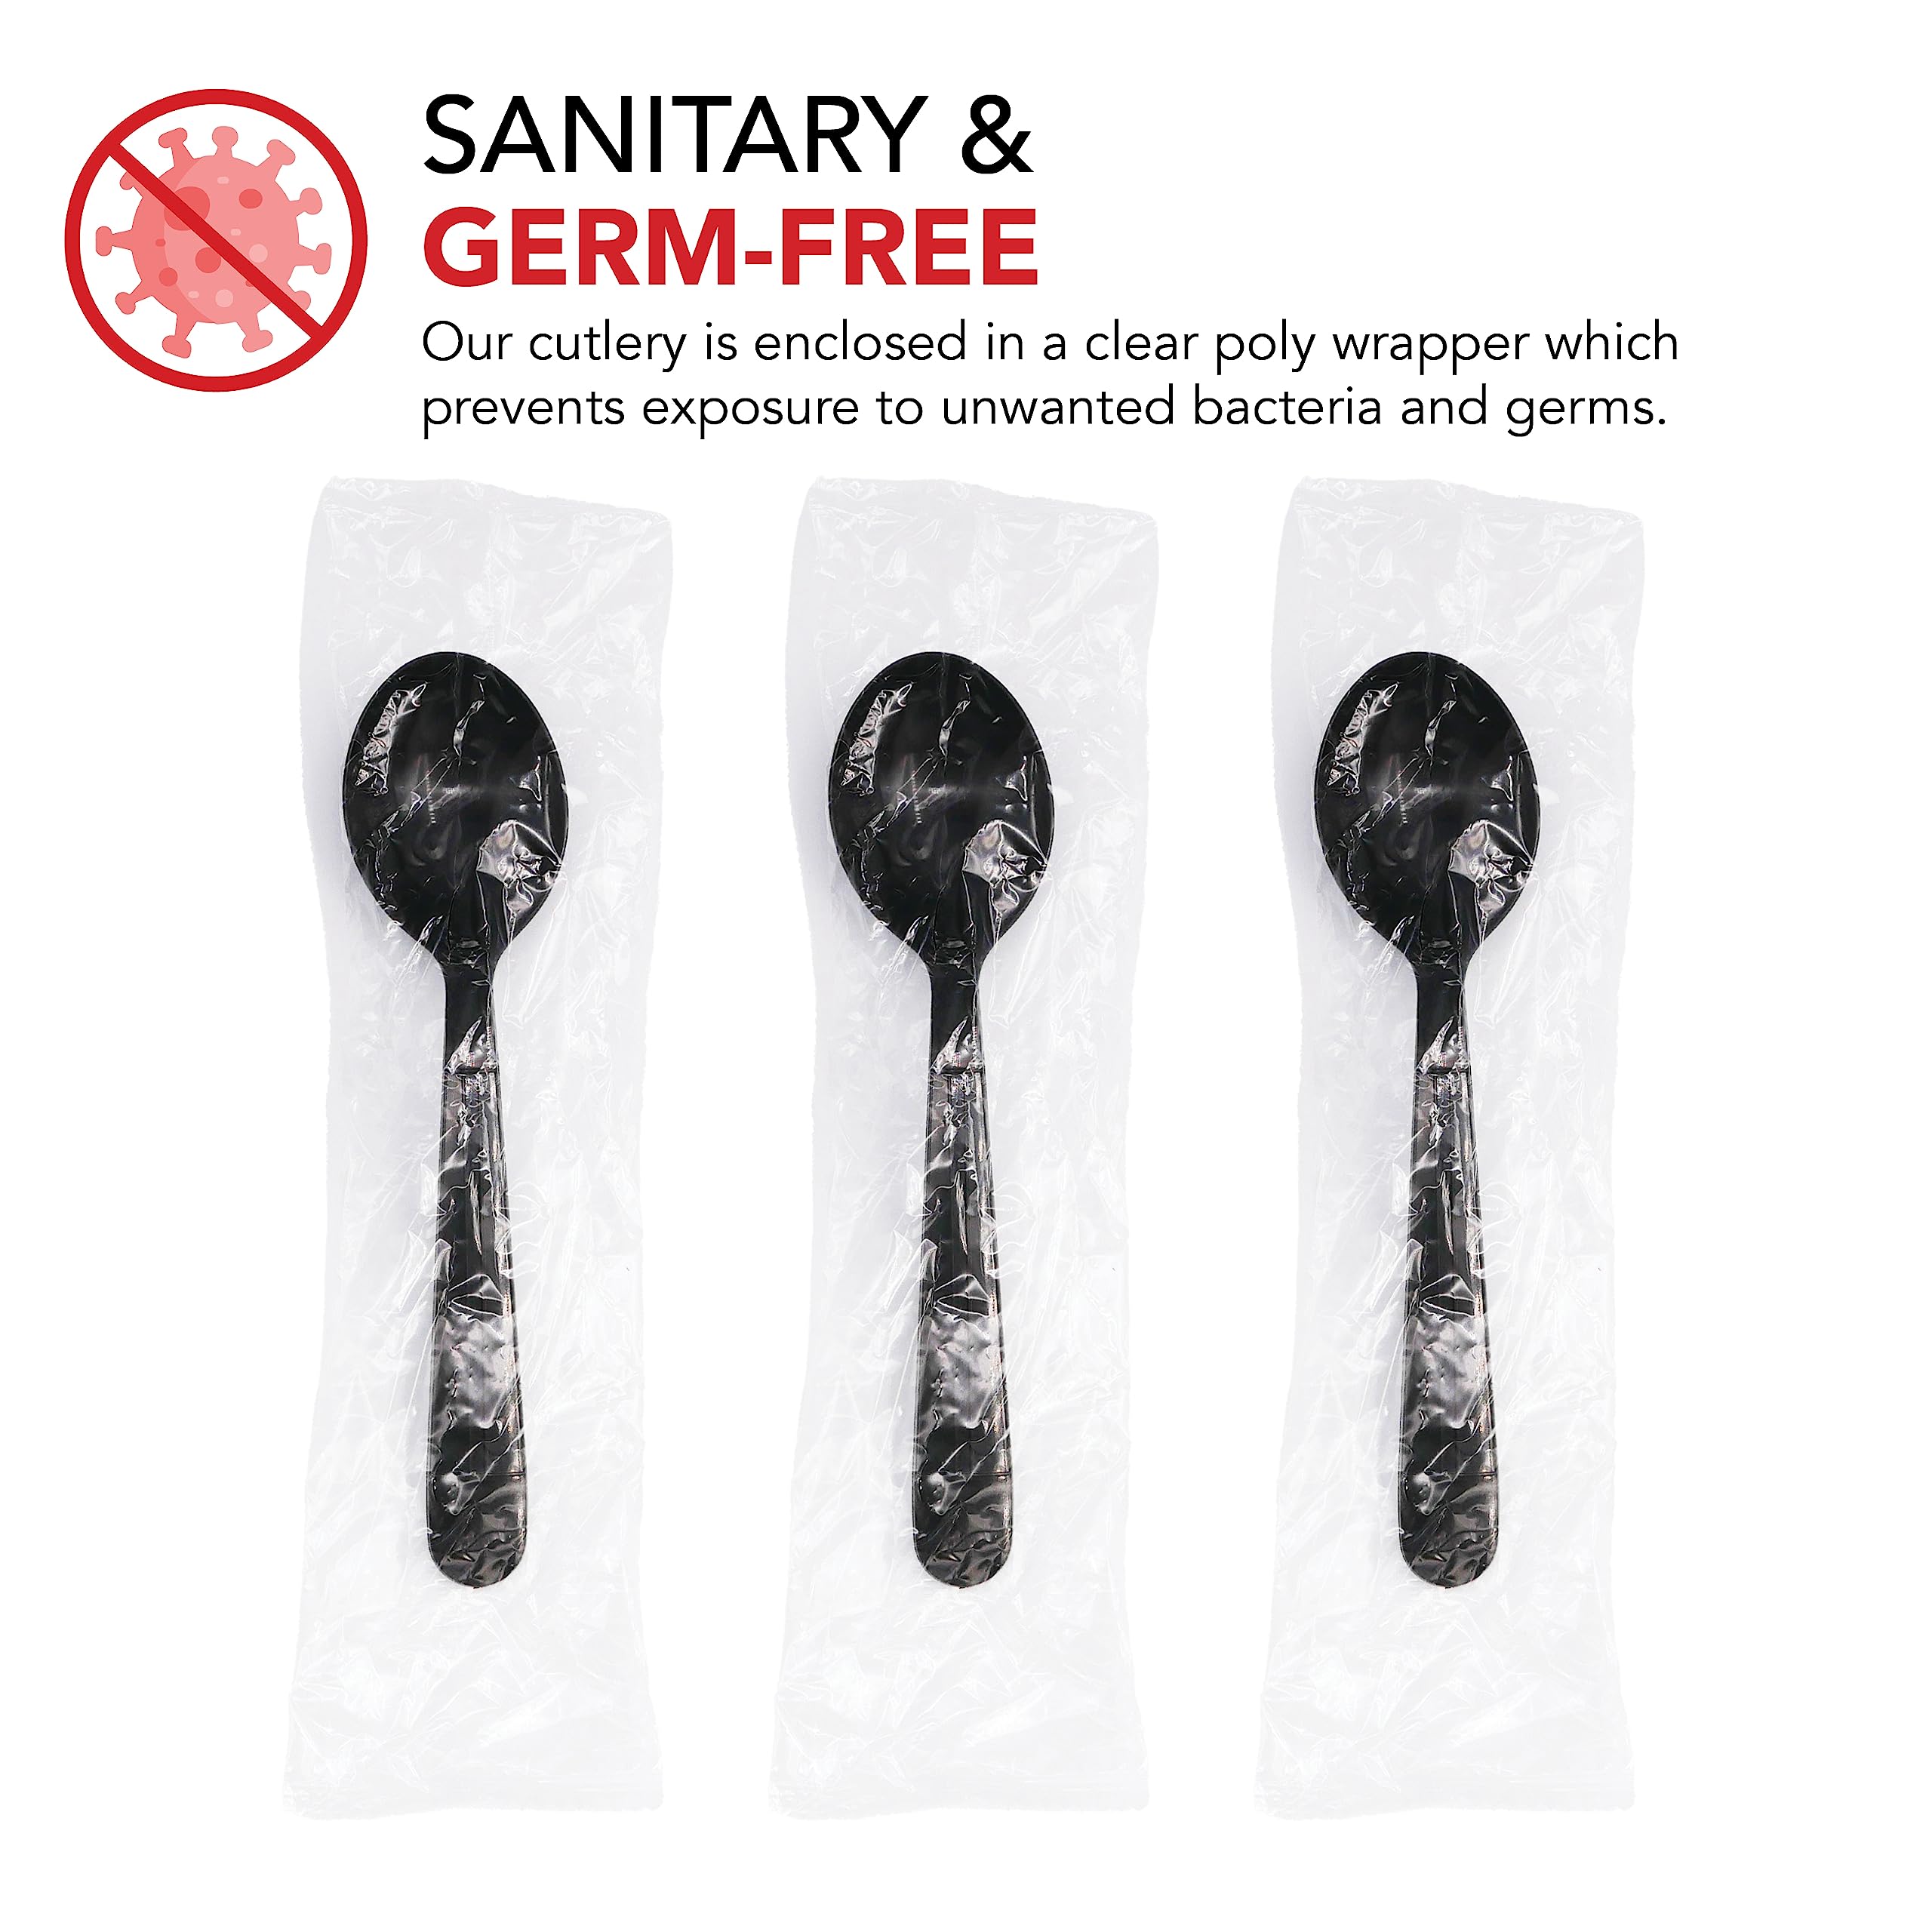 Party Essentials Individually Wrapped Black Plastic Utensil Sets/Heavy Duty Flatware Packs, Soup Spoon, 100 Sets